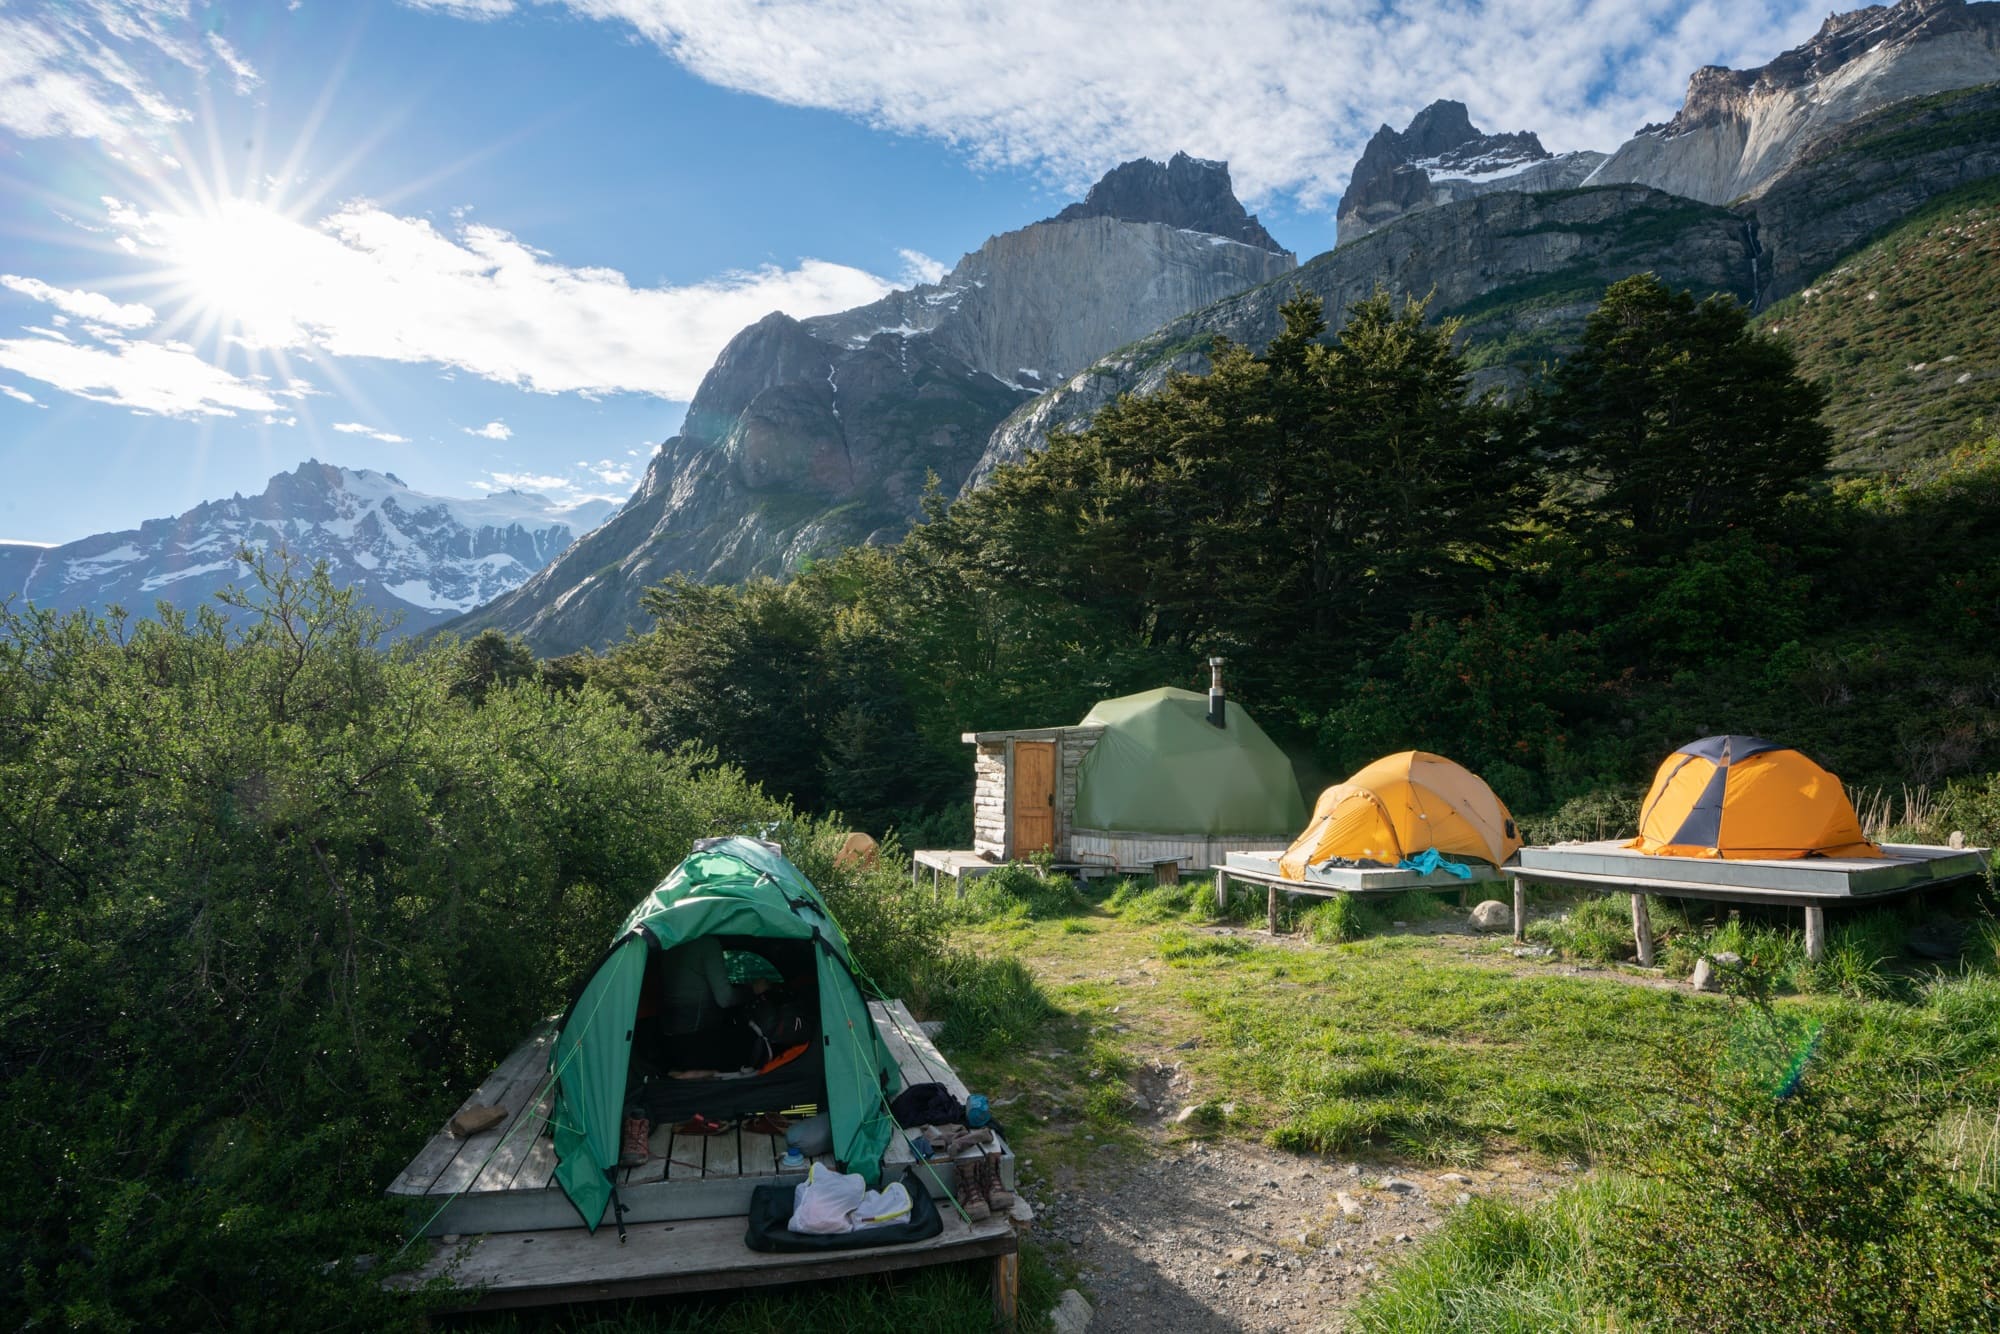 Want to hike the W Trek in Torres Del Paine? My W Trek packing list will have you prepared for hiking & camping on this bucket-list trail in Patagonia.